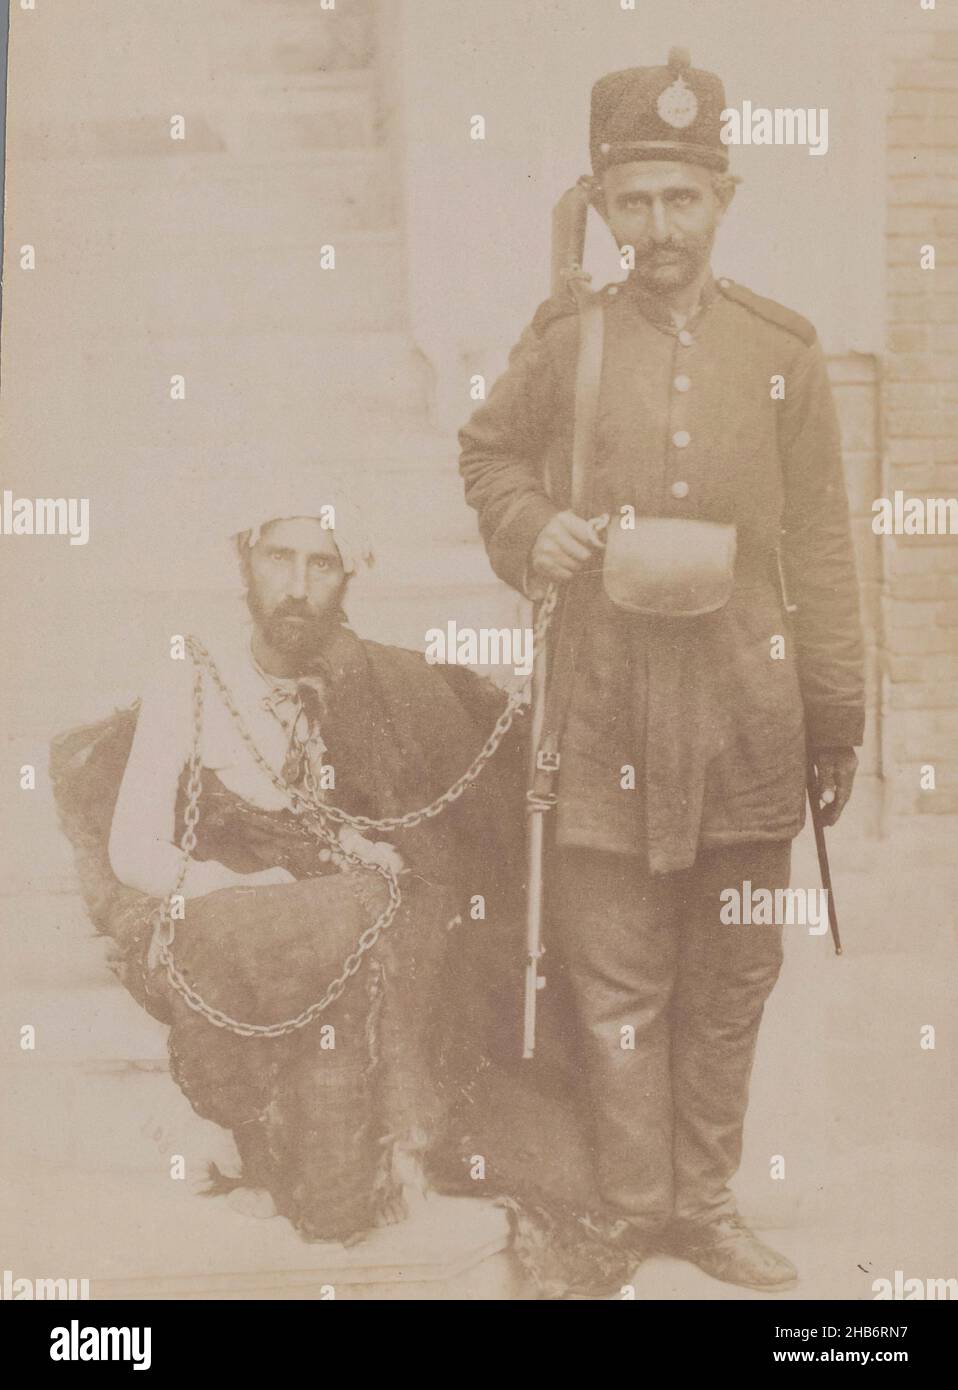 Portrait of two men: a prisoner and a guard, Iran, Frontal portrait of two men: a prisoner and a guard. The prisoner is chained with a long chain and crouches on the ground staring blankly and wrapped in a blanket. The guard in uniform stands and holds the chain in his hand, a rifle around the shoulder., Antoine Sevruguin, (attributed to), Iran, c. 1885 - c. 1910, paper, albumen print, height 204 mm, width 145 mm Stock Photo